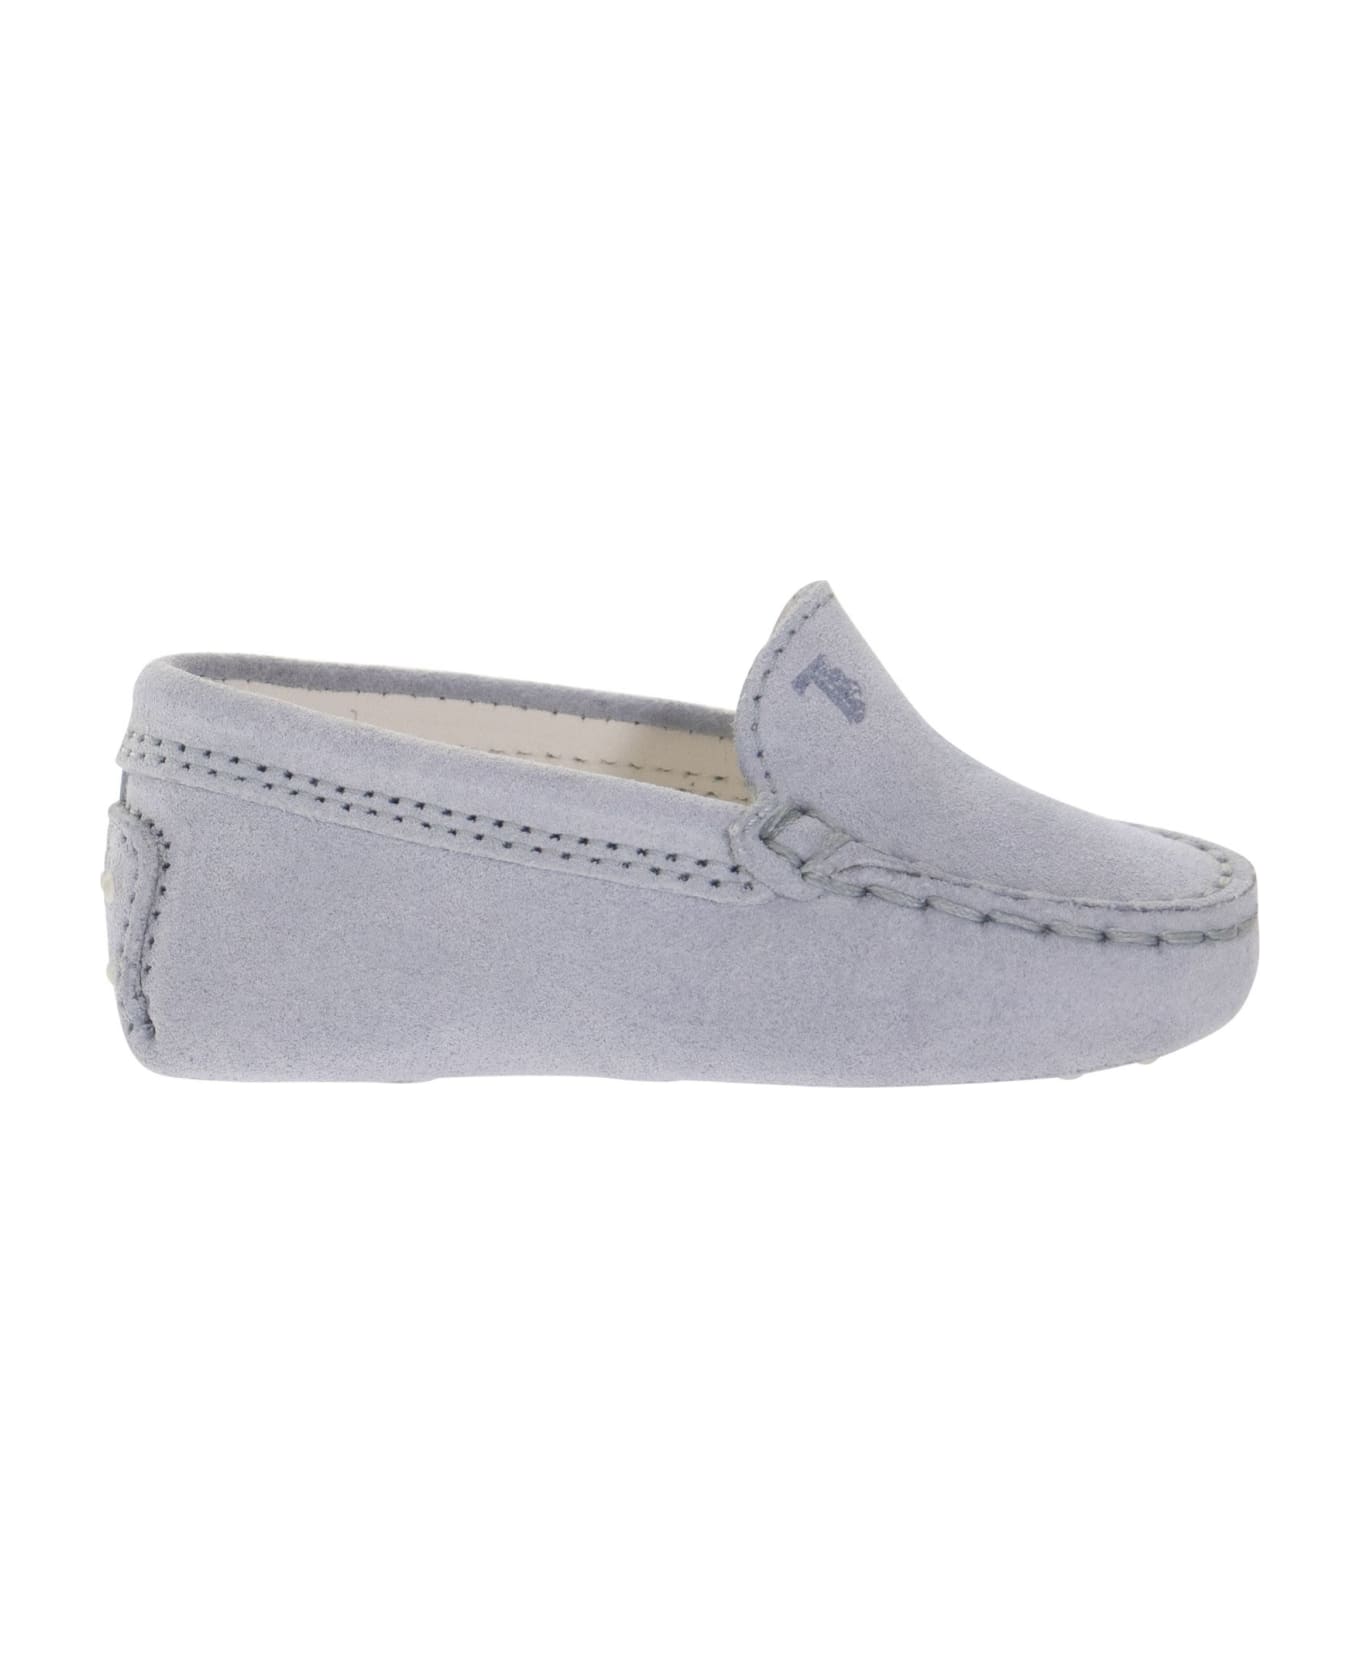 Tod's Gommino Suede Loafer - Light Blue